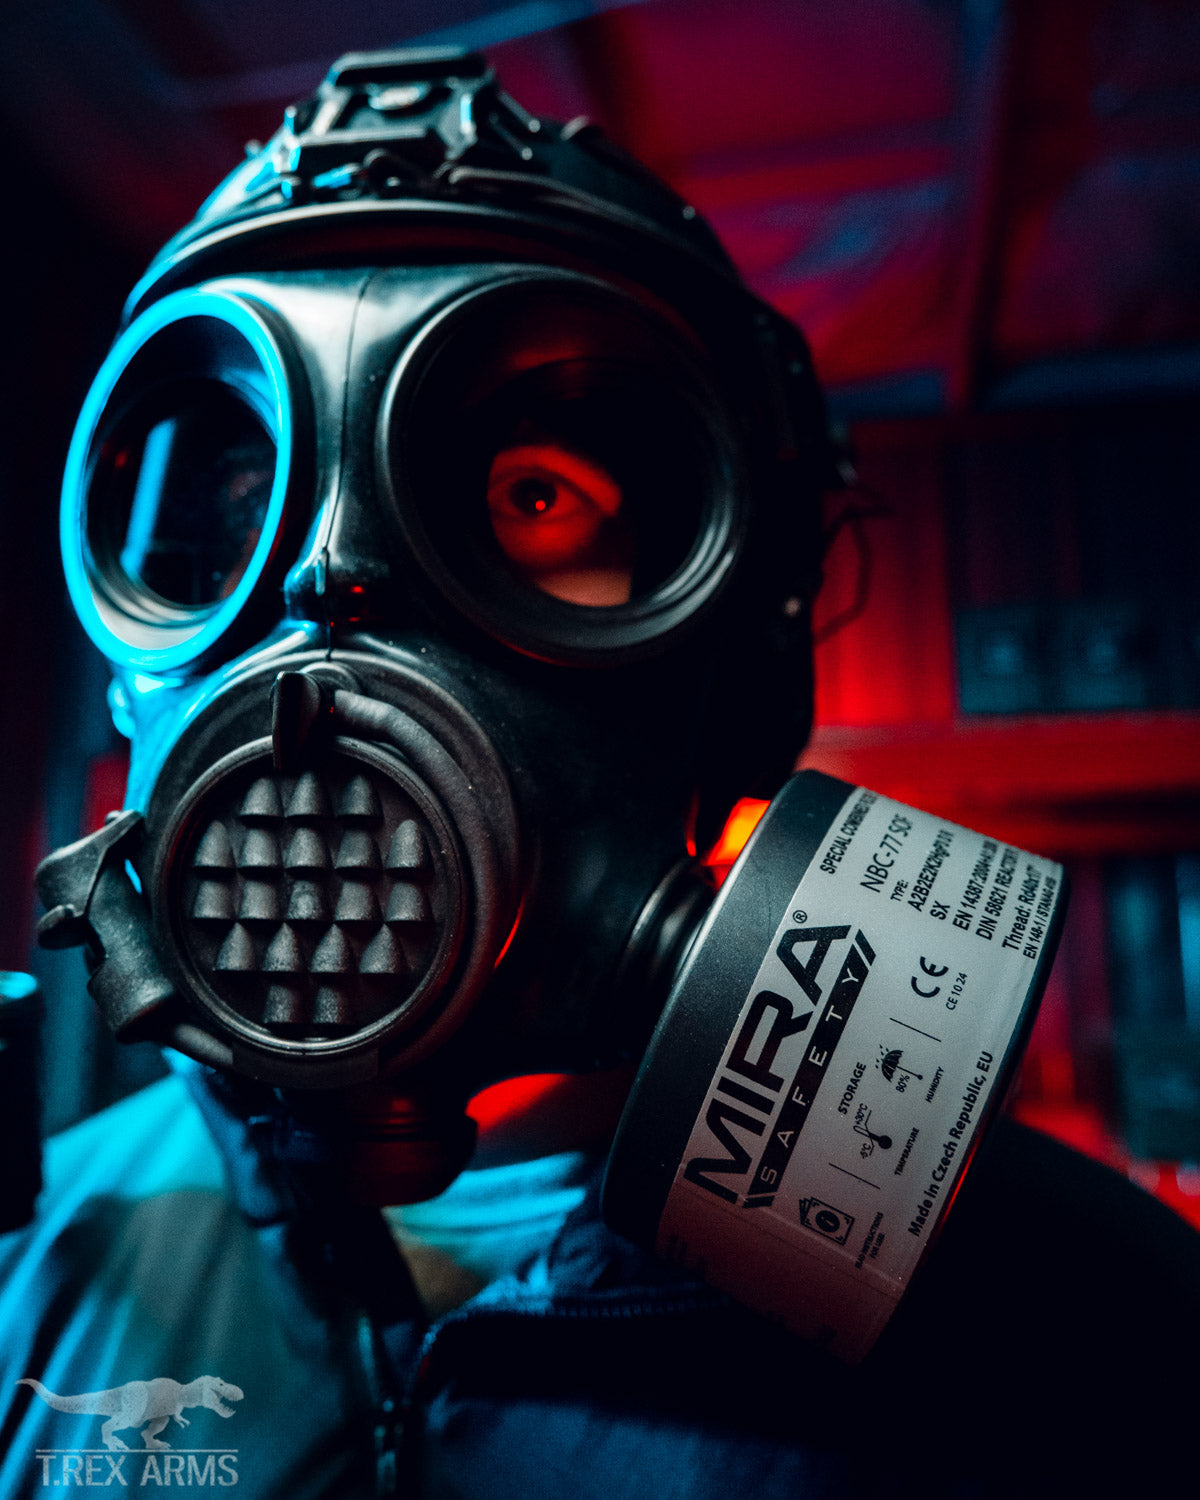 Mira Safety Sells Gas Masks, But Who is Mira Safety? Is Mira Safety Legit?